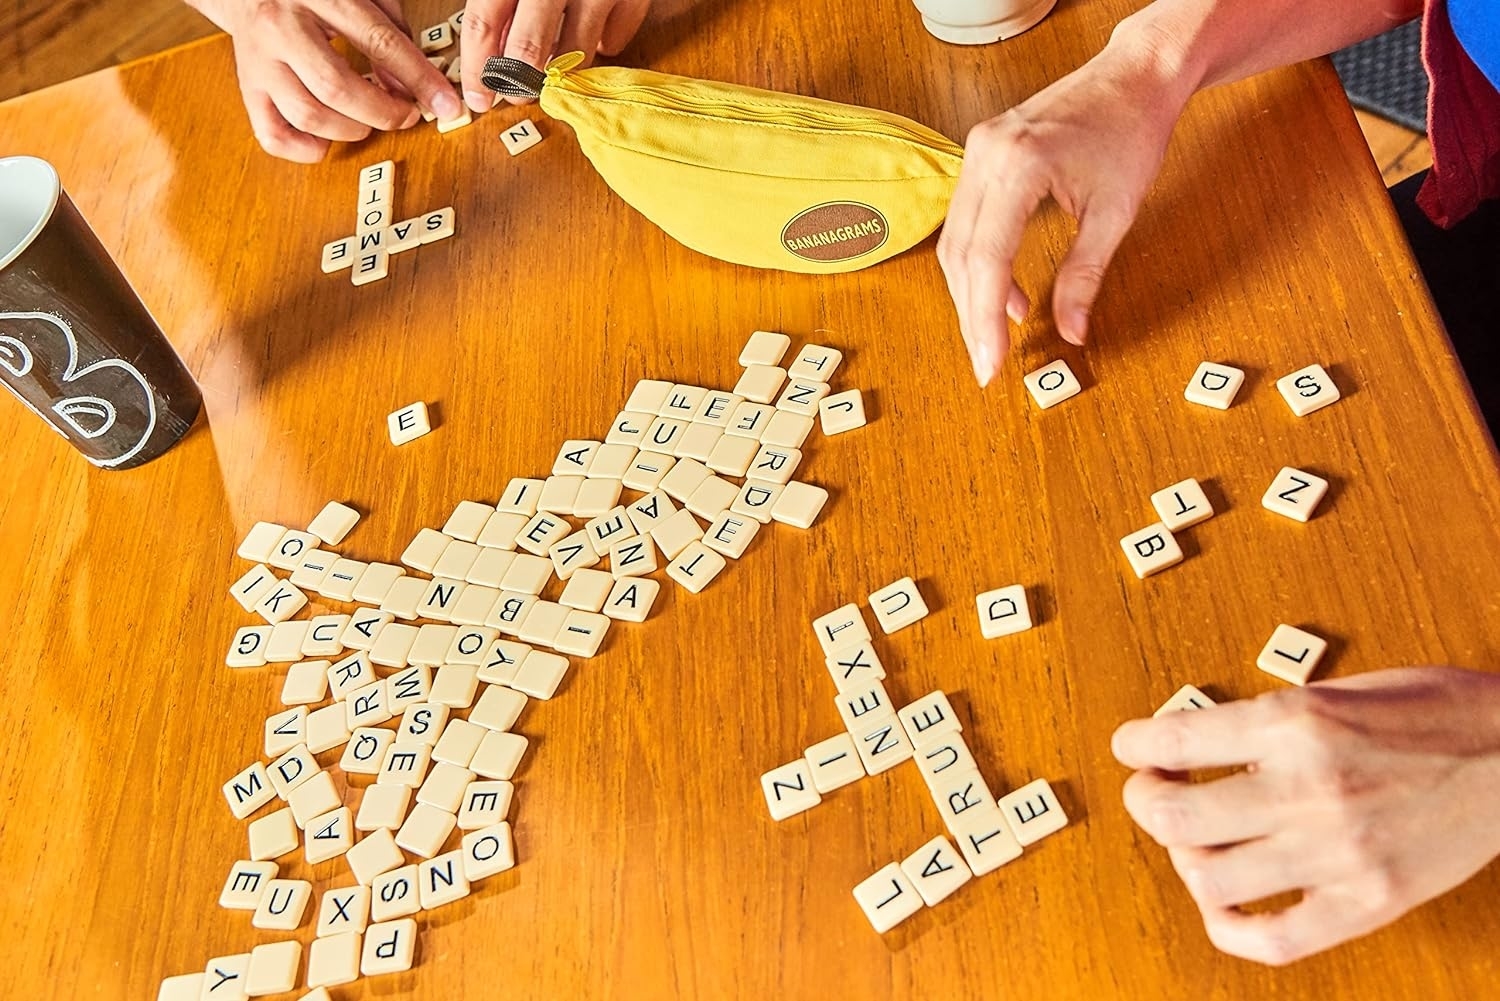 bananagrams the game